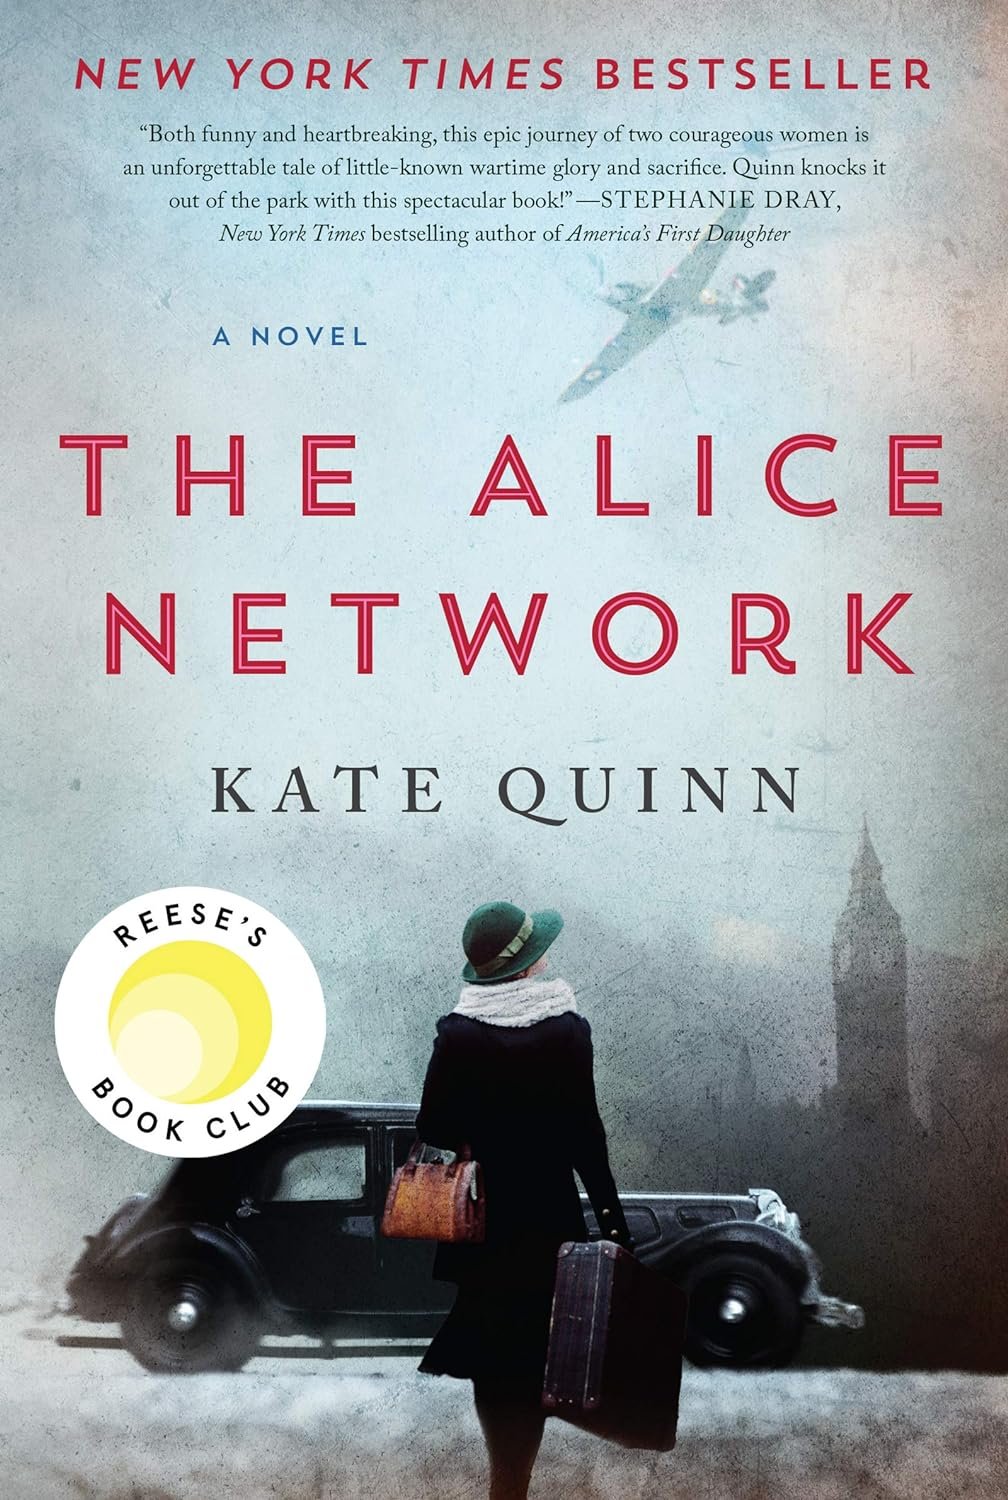 The Alice Network by Kate Quinn.jpg